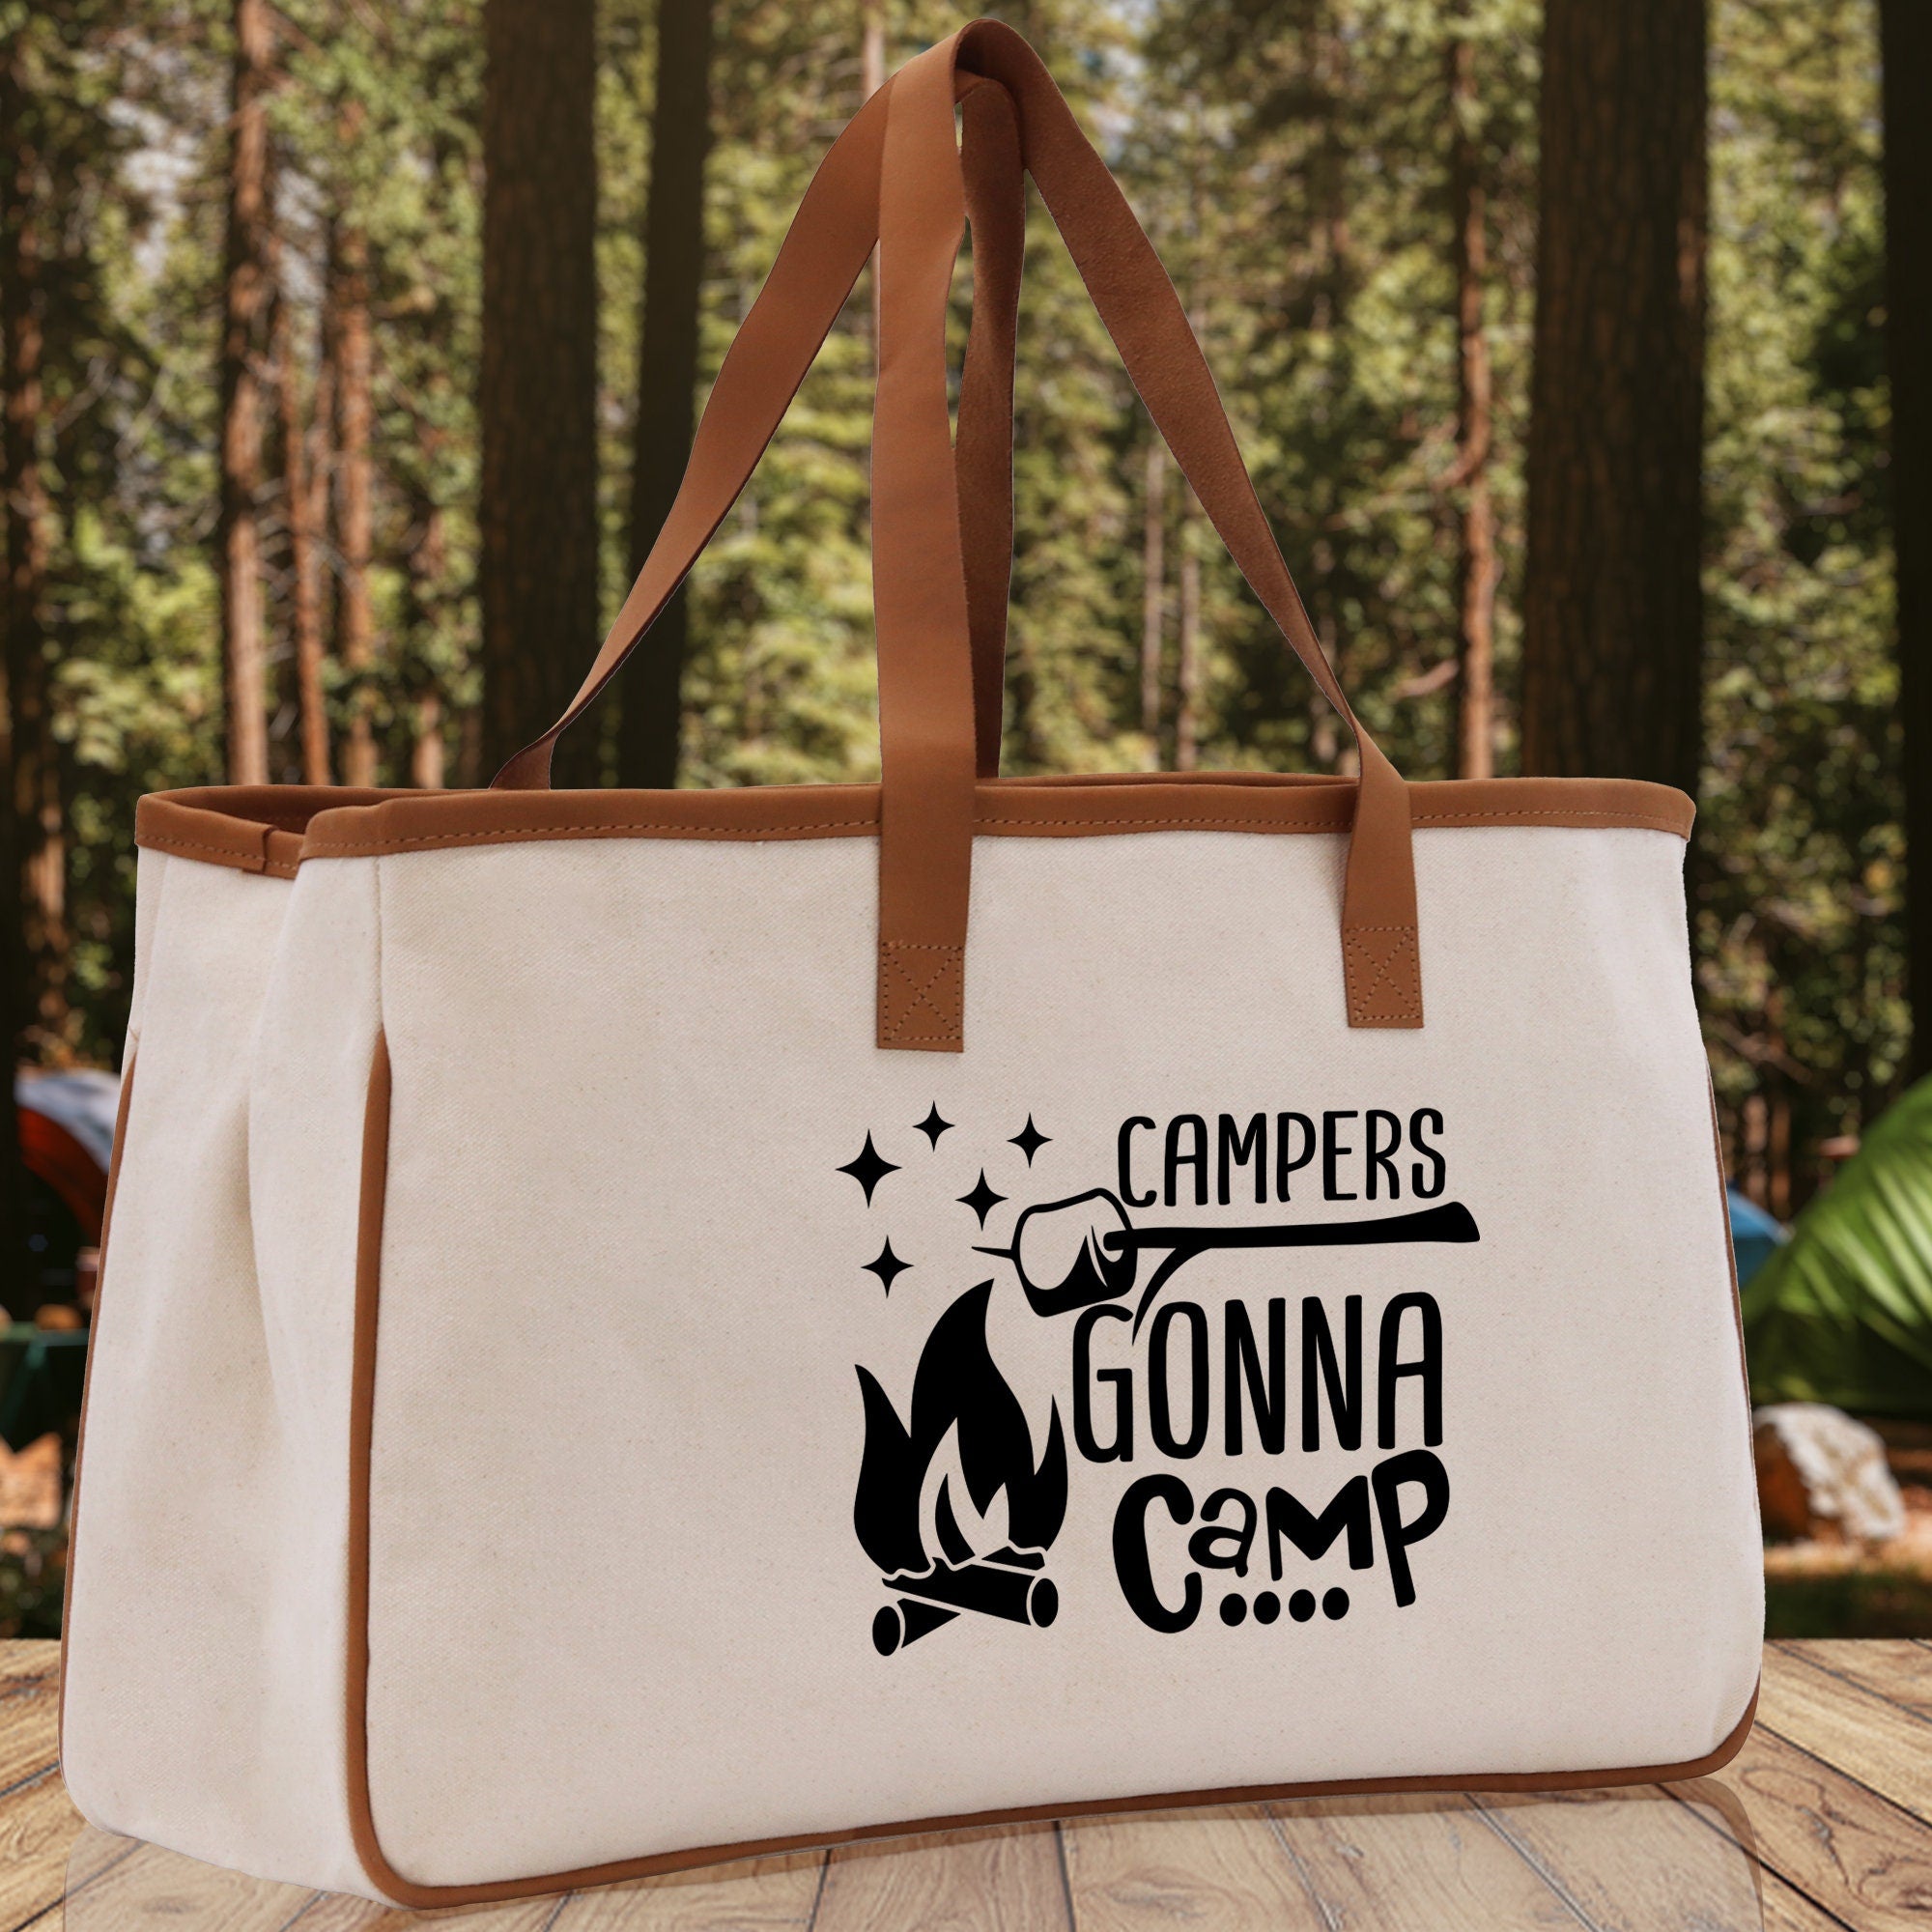 Campers Gonna Camp Cotton Canvas Chic Tote Bag Camping Tote Camping Lover Gift Tote Bag Outdoor Tote Weekender Tote Camper Multipurpose Tote